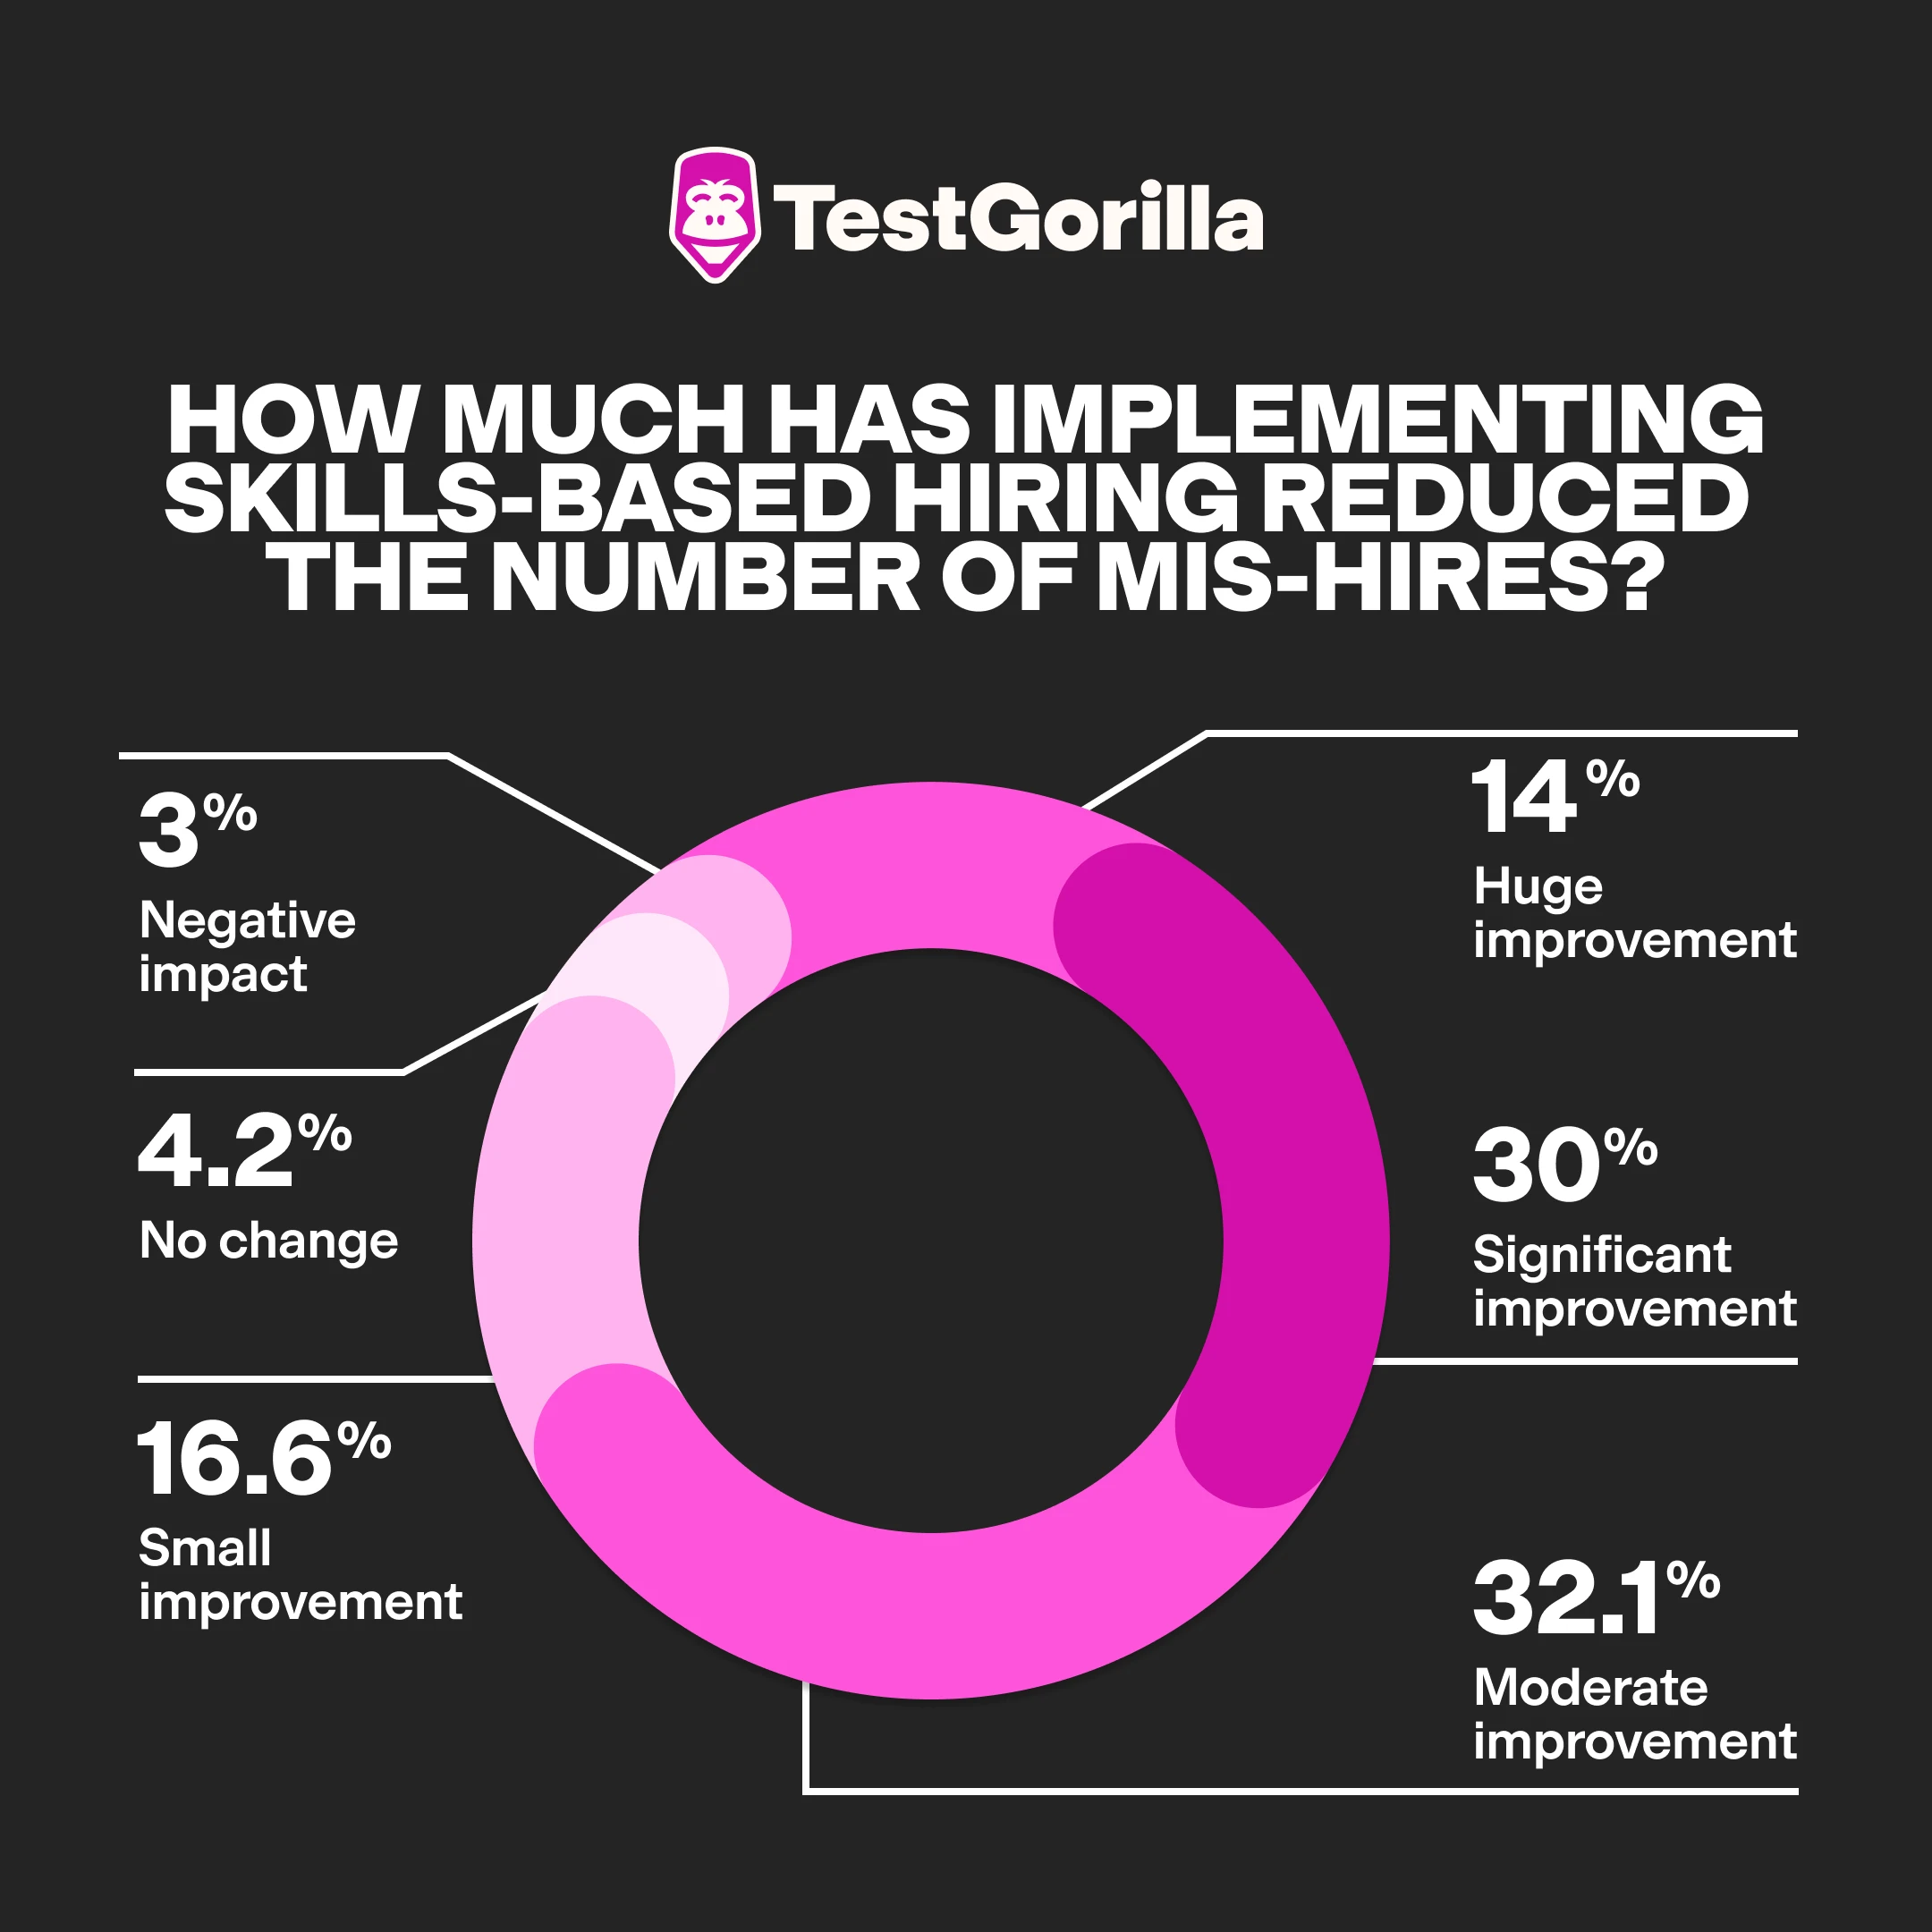 Pie chart showing how many companies have reduced their number of mis-hires with skills-based hiring